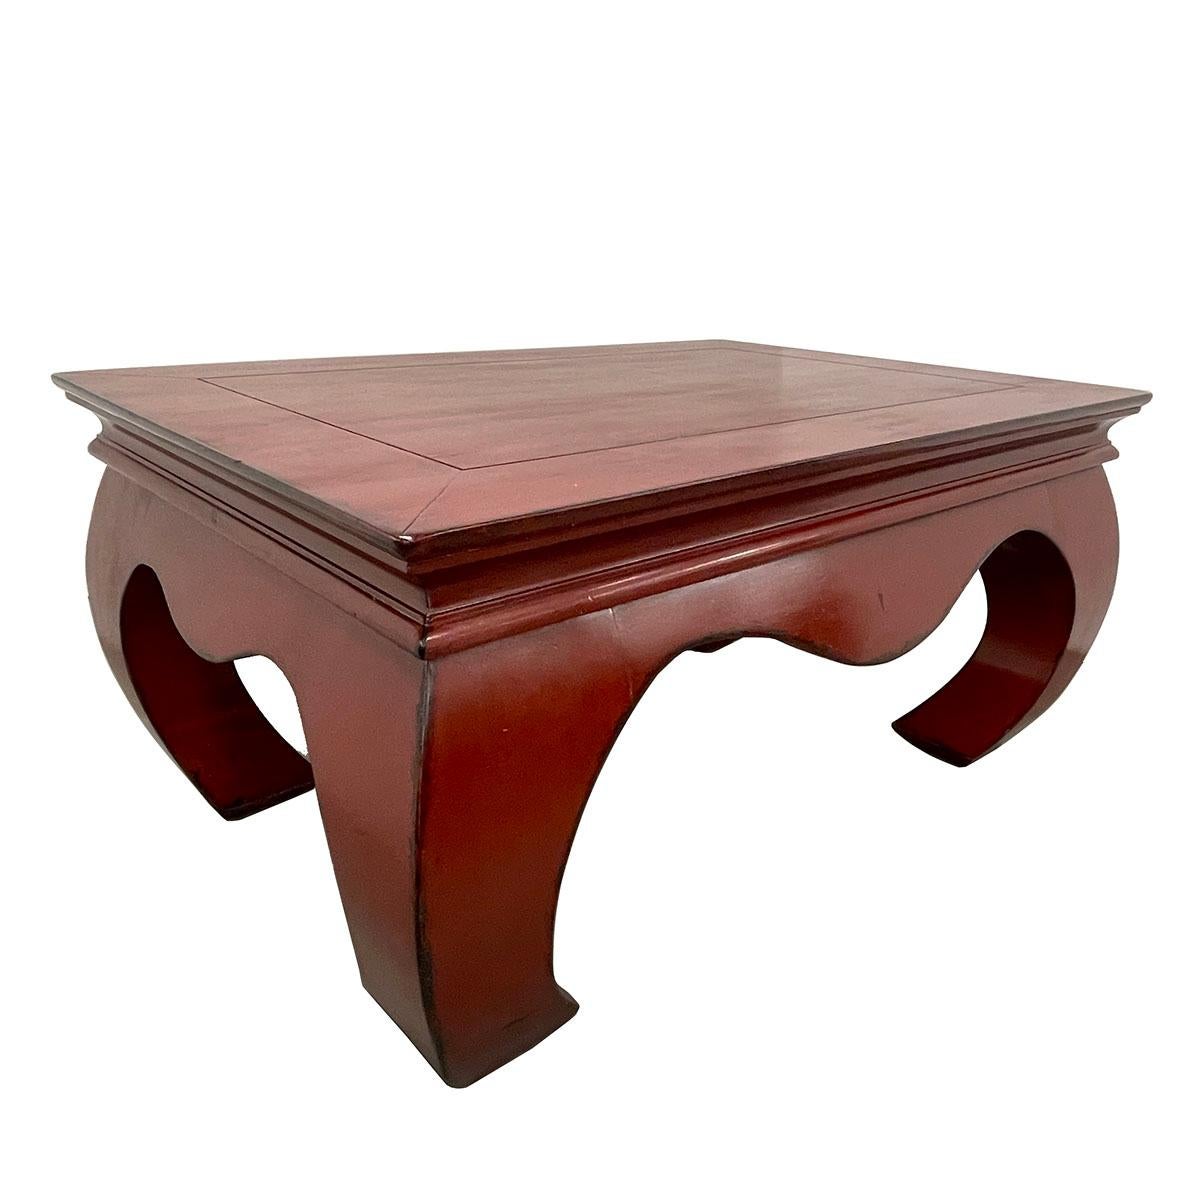 This Massive Chinese Ming Dynasty style coffee table was made from solid elm wood with red lacquer finish. It has narrow carved waist and four huge banana legs which is typical Ming dynasty style. It is heavy and sturdy. Very smooth to touch and